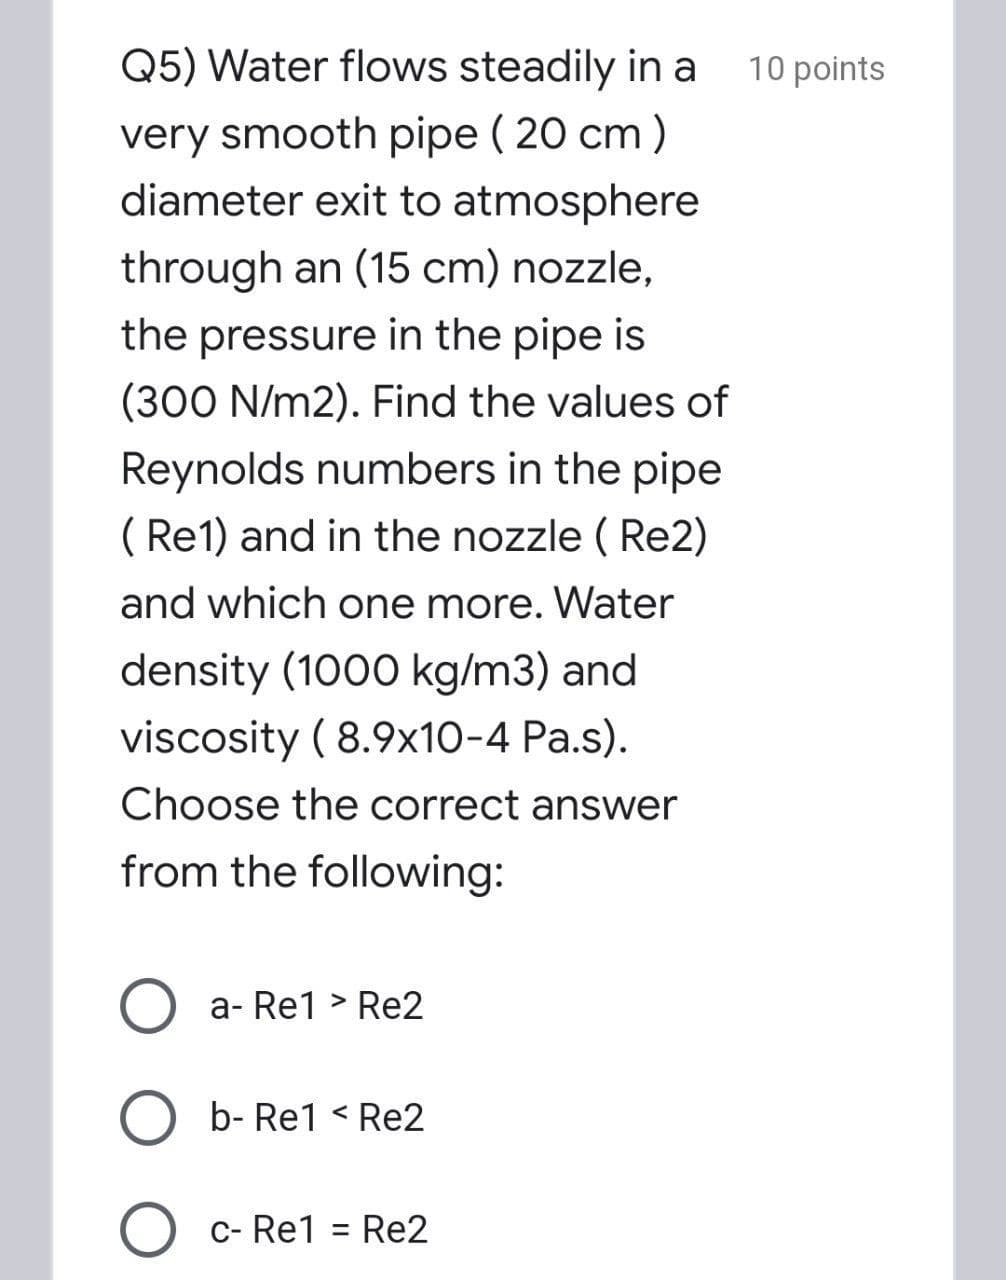 Q5) Water flows steadily in a
10 points
very smooth pipe ( 20 cm )
diameter exit to atmosphere
through an (15 cm) nozzle,
the pressure in the pipe is
(300 N/m2). Find the values of
Reynolds numbers in the pipe
( Re1) and in the nozzle ( Re2)
and which one more. Water
density (1000 kg/m3) and
viscosity ( 8.9x10-4 Pa.s).
Choose the correct answer
from the following:
a- Re1 > Re2
b- Re1 < Re2
c- Re1
Re2
%3D
